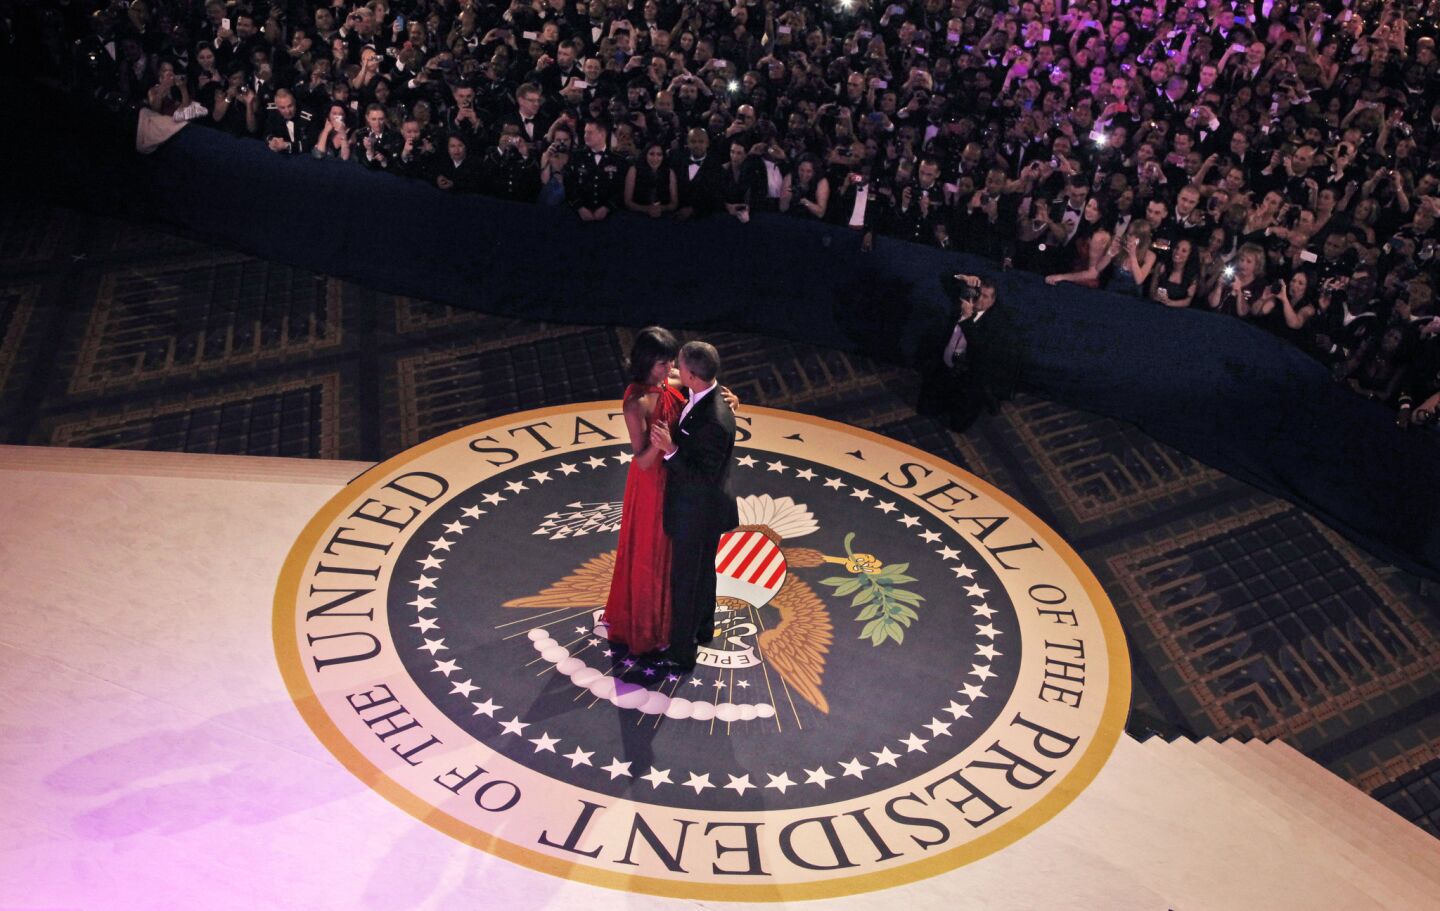 President Obama and First Lady Michelle Obama take to the dance floor during the Commander-in-Chief Inaugural Ball at the Washington Convention Center.